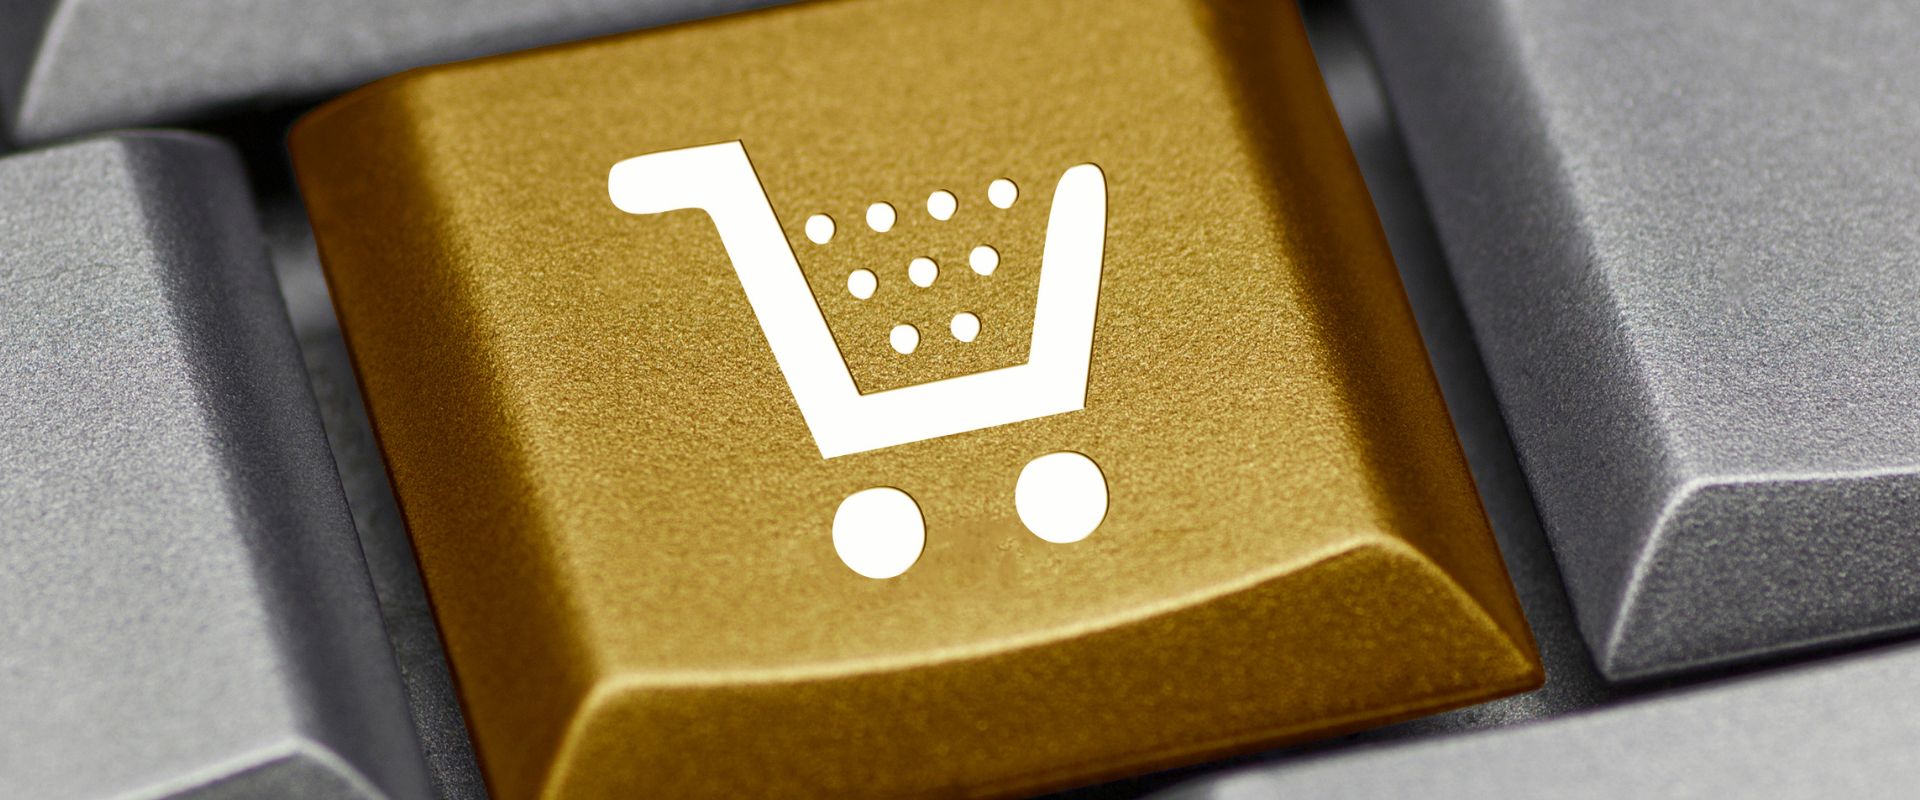 gold computer key with shopping cart icon